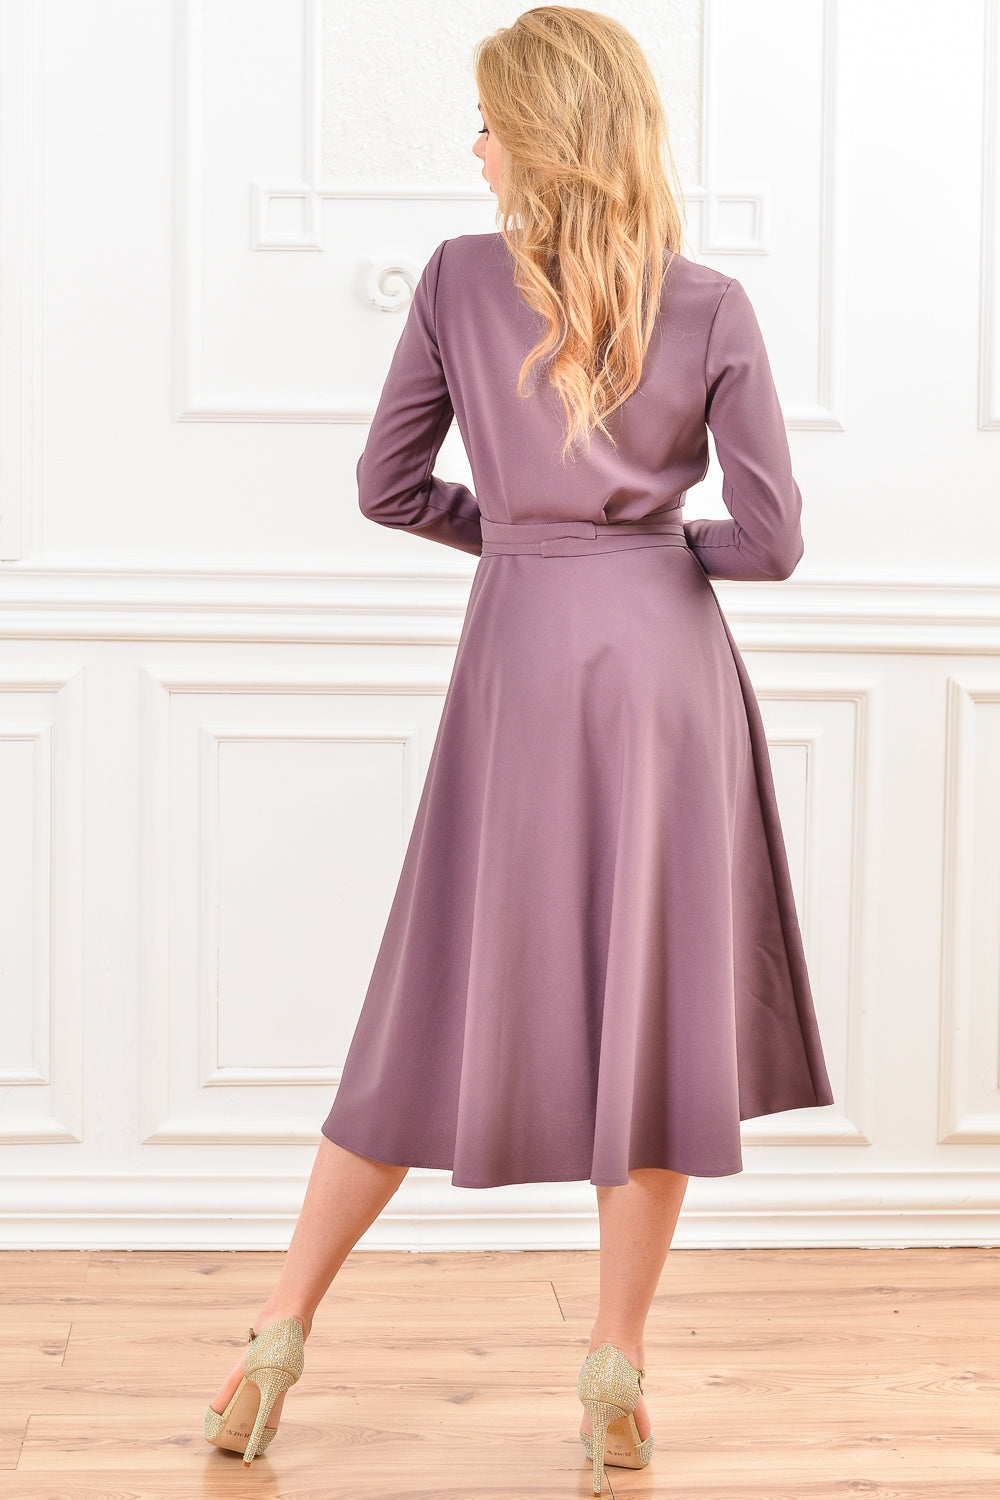 Light purple dress with stand up collar and front buttons